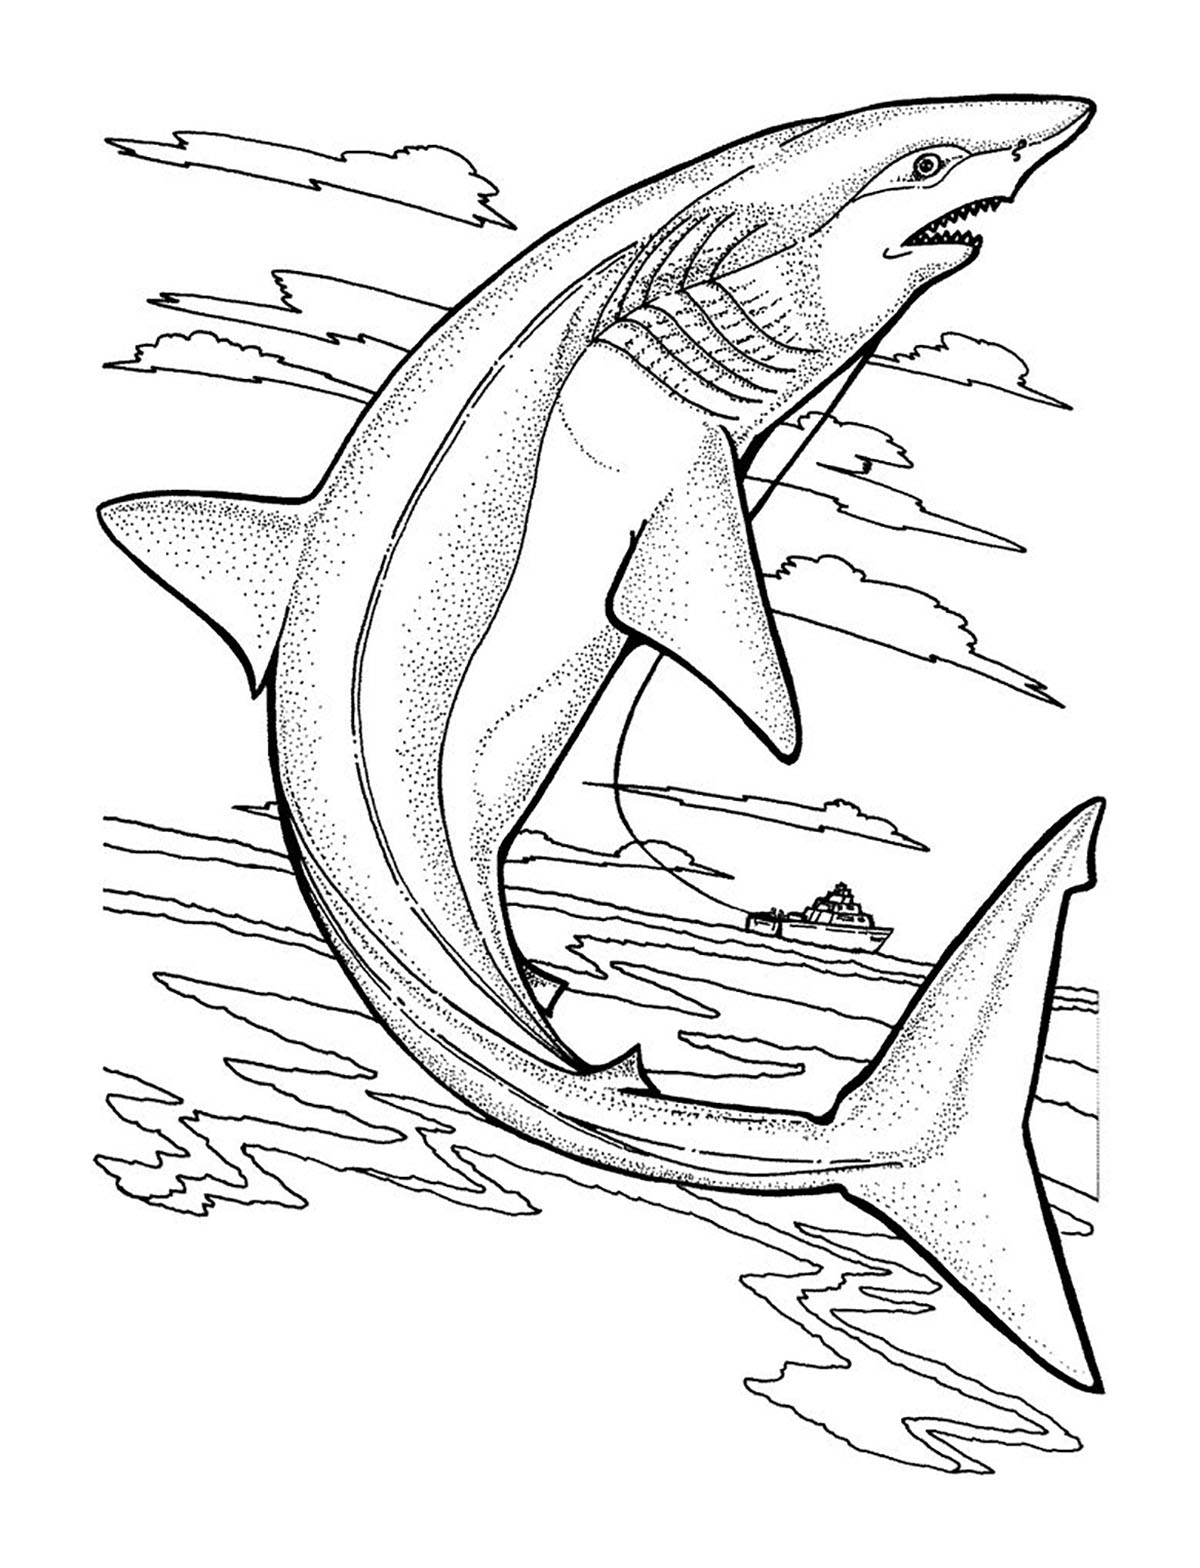 sharks-to-print-for-free-sharks-kids-coloring-pages